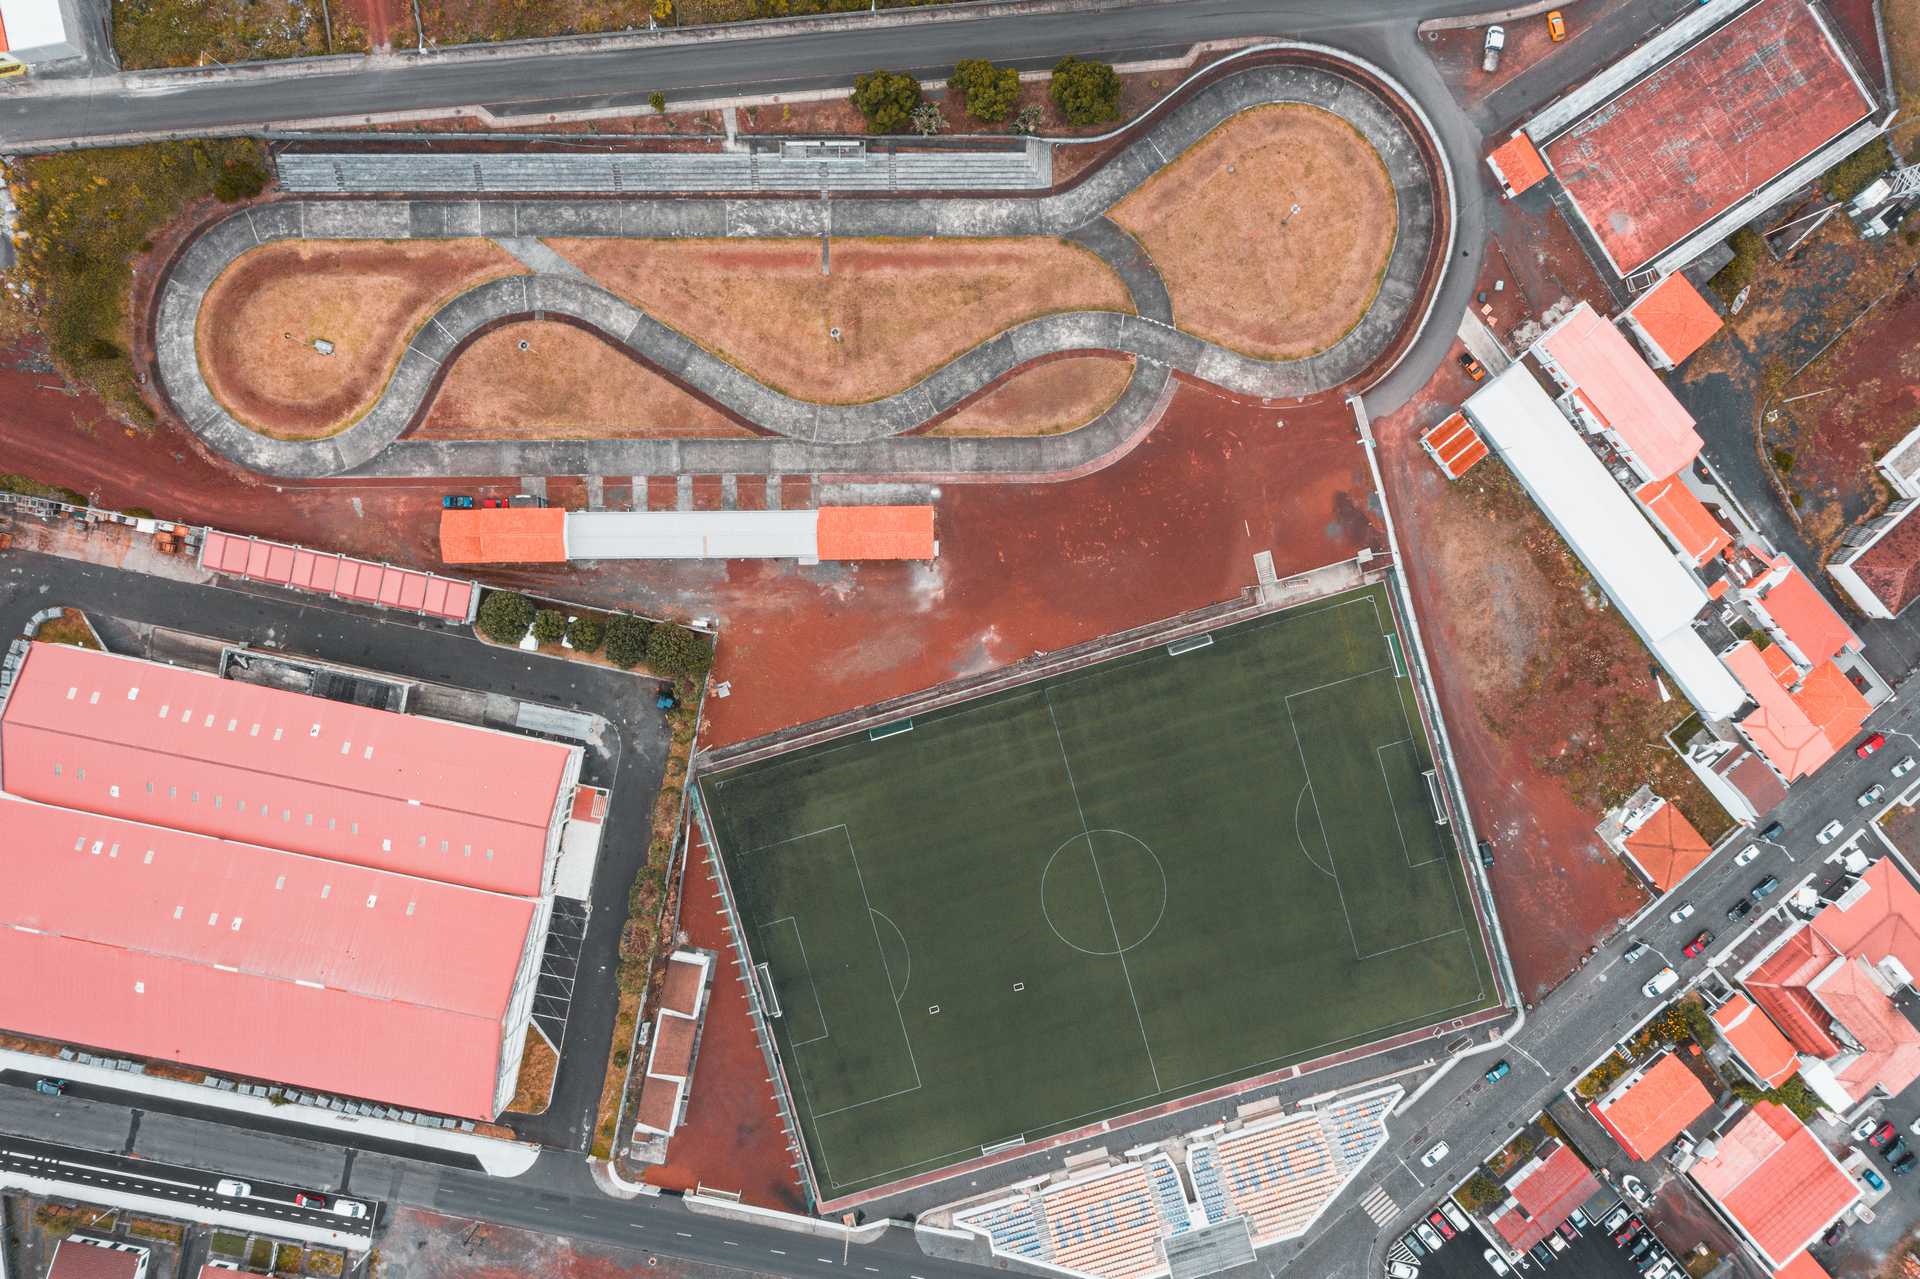 Aerial view of football field and other buildings in Pico, The Azores. Pico views and trouble parking at the whaling museum